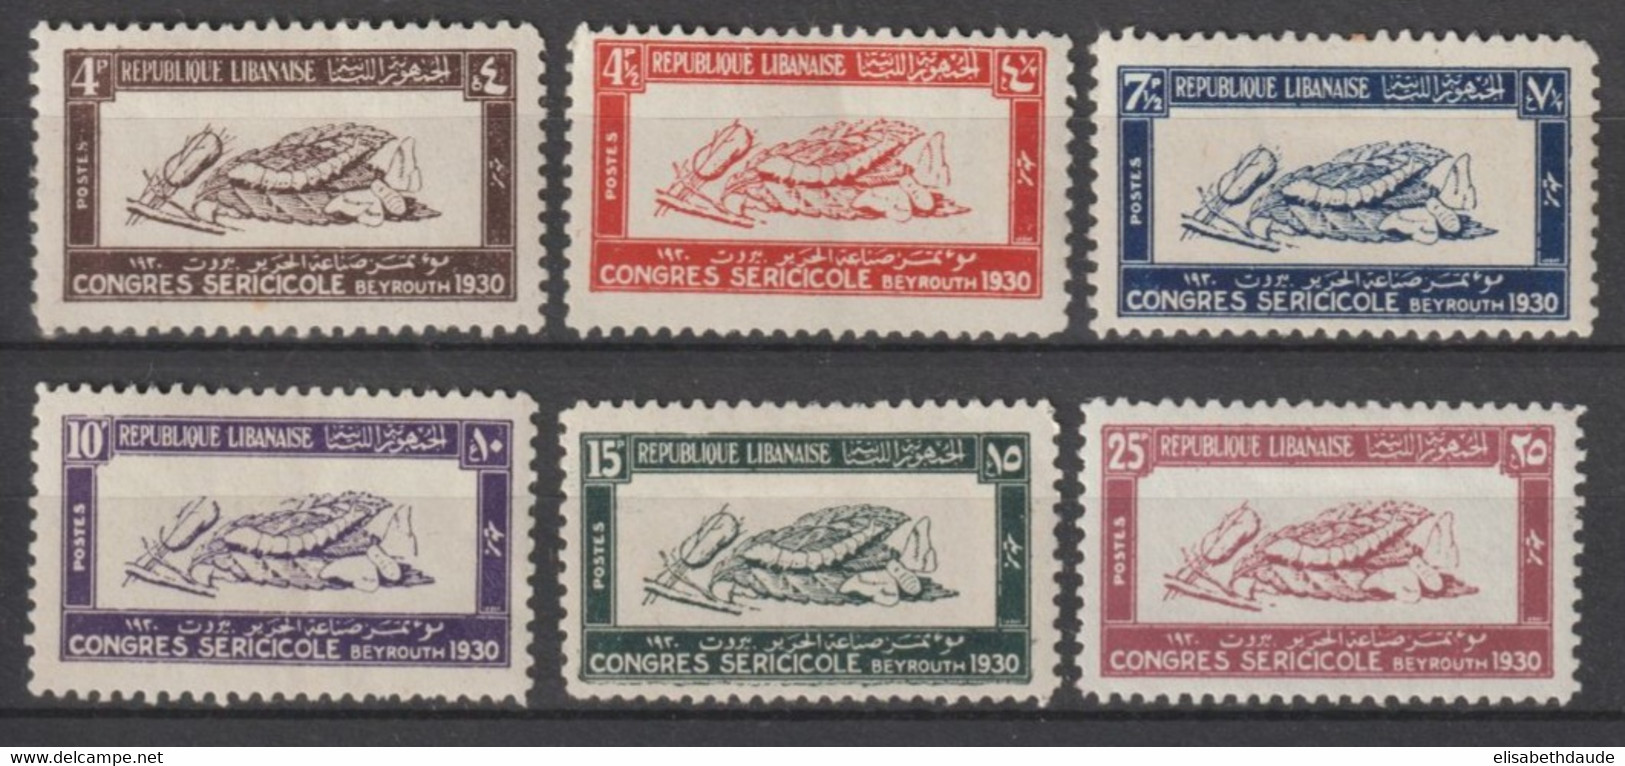 GRAND-LIBAN - 1930 - SERIE COMPLETE CONGRES SERICOLE - YVERT N°122/127 * MH - COTE = 104 EUR. - Unused Stamps